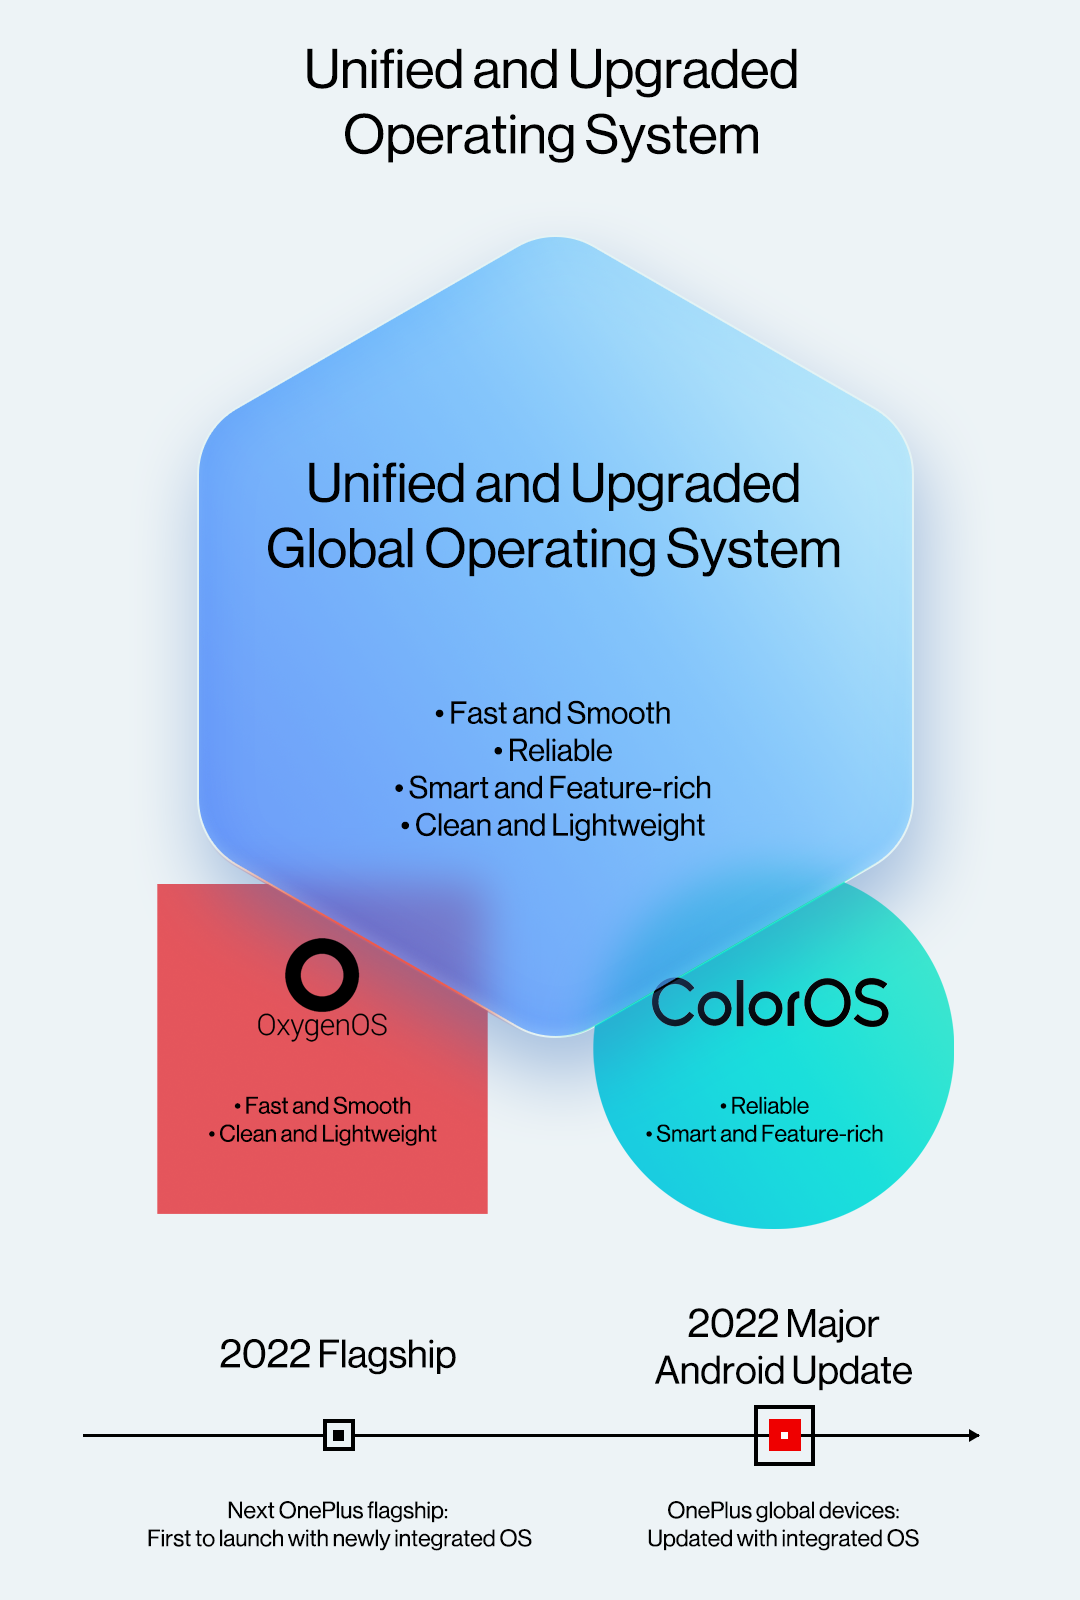 OnePlus Unified Operating System